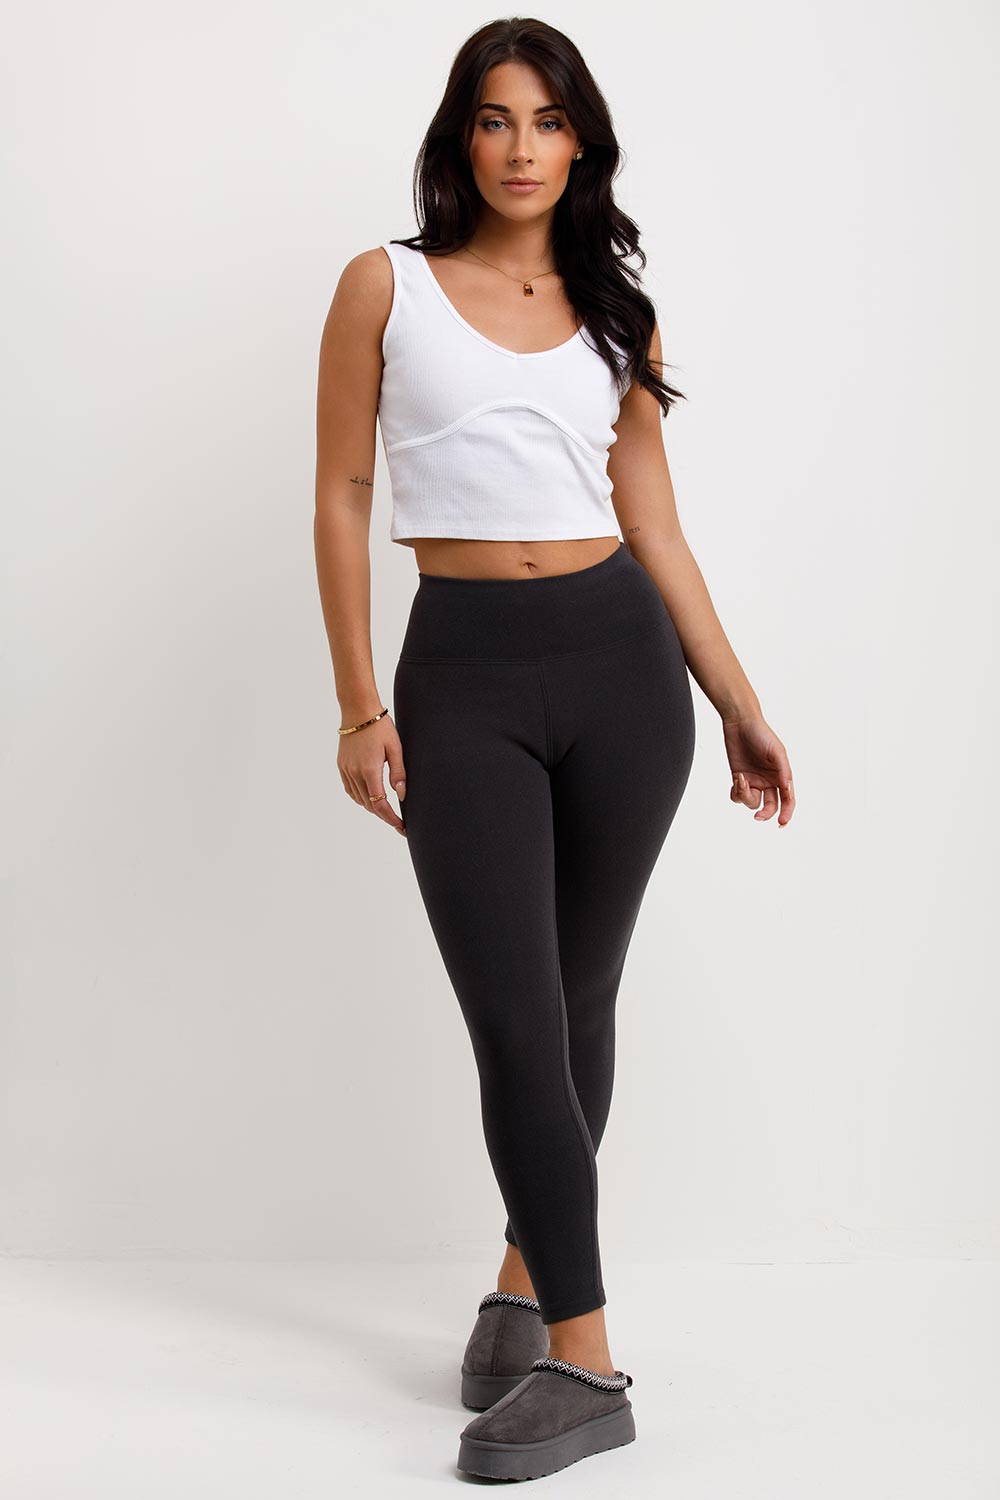 Suede Leggings High Waisted Charcoal Grey –